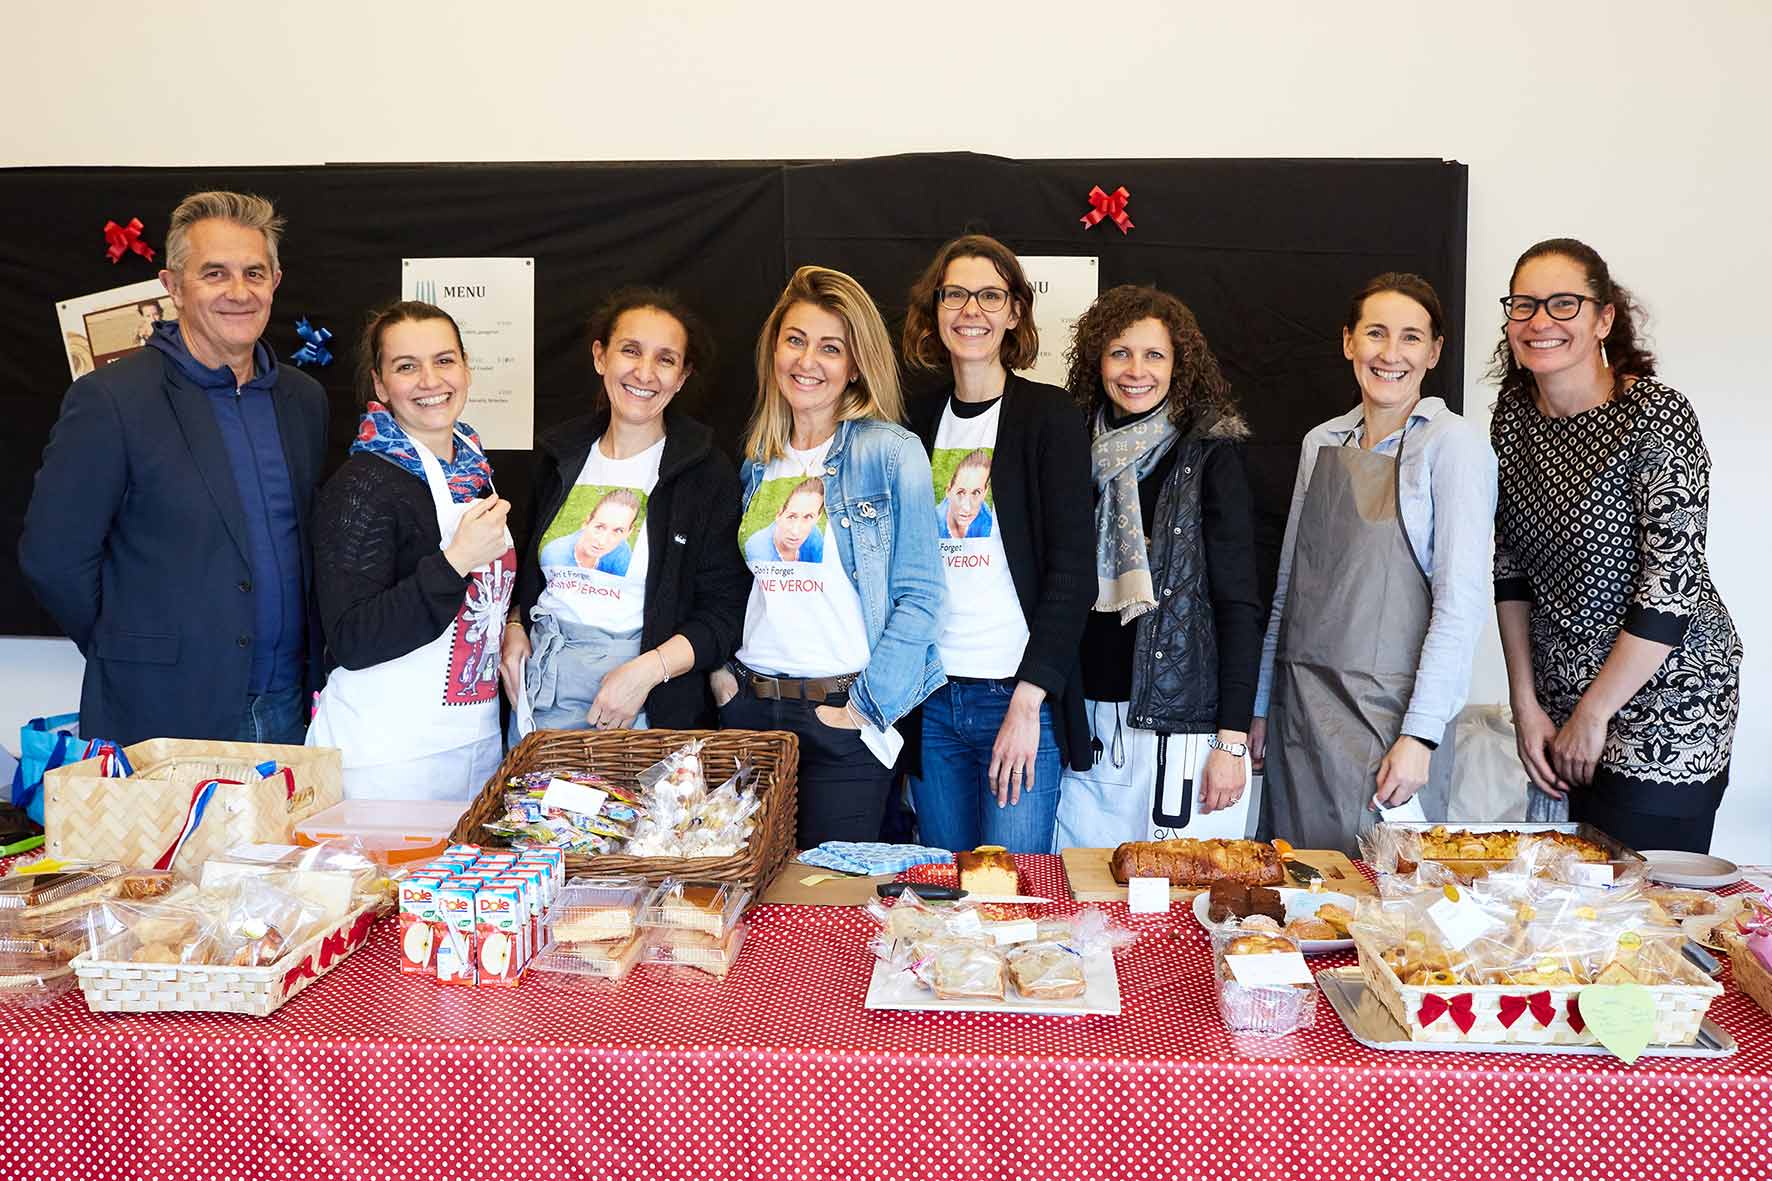 A French Bake Sale Organised by Saint Maur Parents for a Good Cause